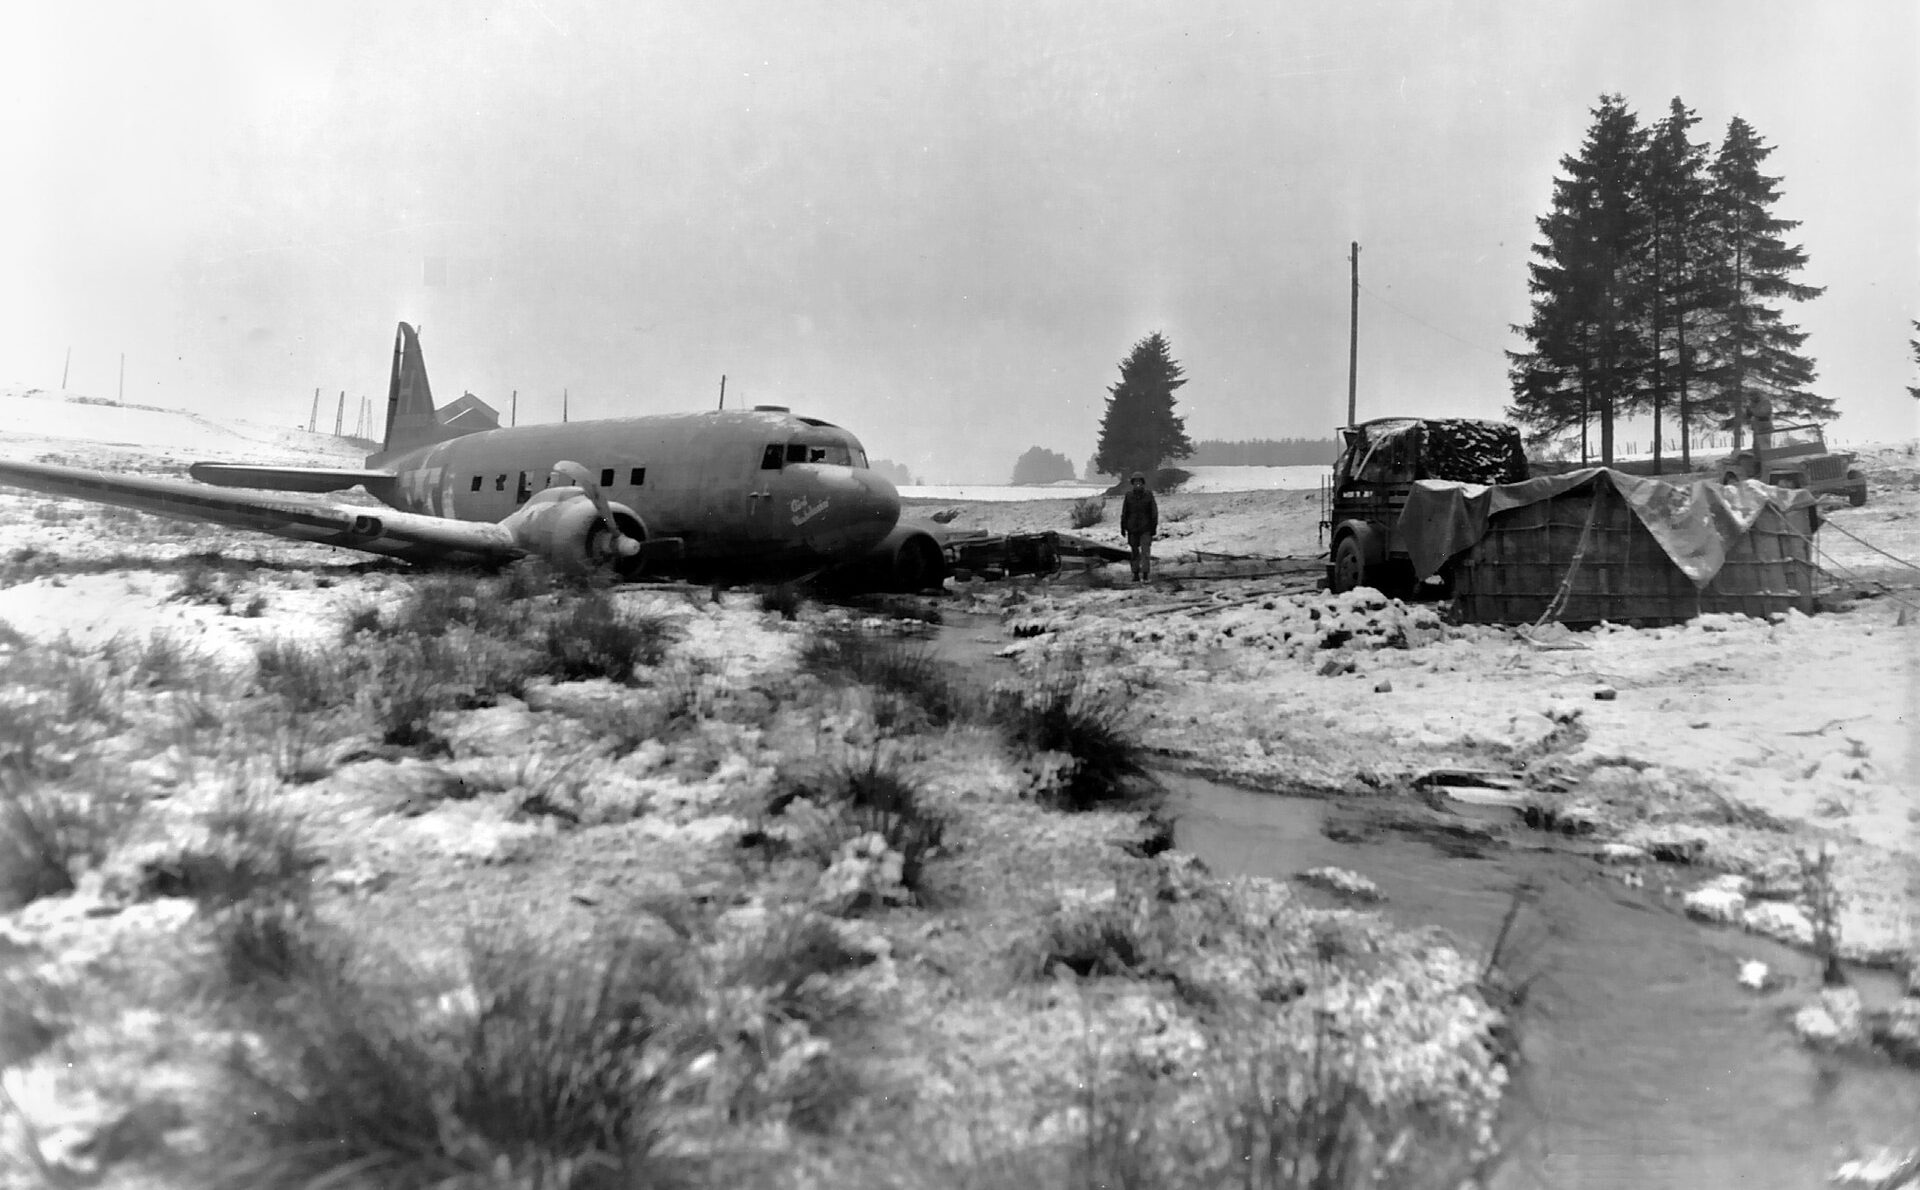 The pilot of a C-47 transport plane crash-landed safely after being shot down during resupply of 101st Airborne units near Bastogne during the Battle of the Bulge.